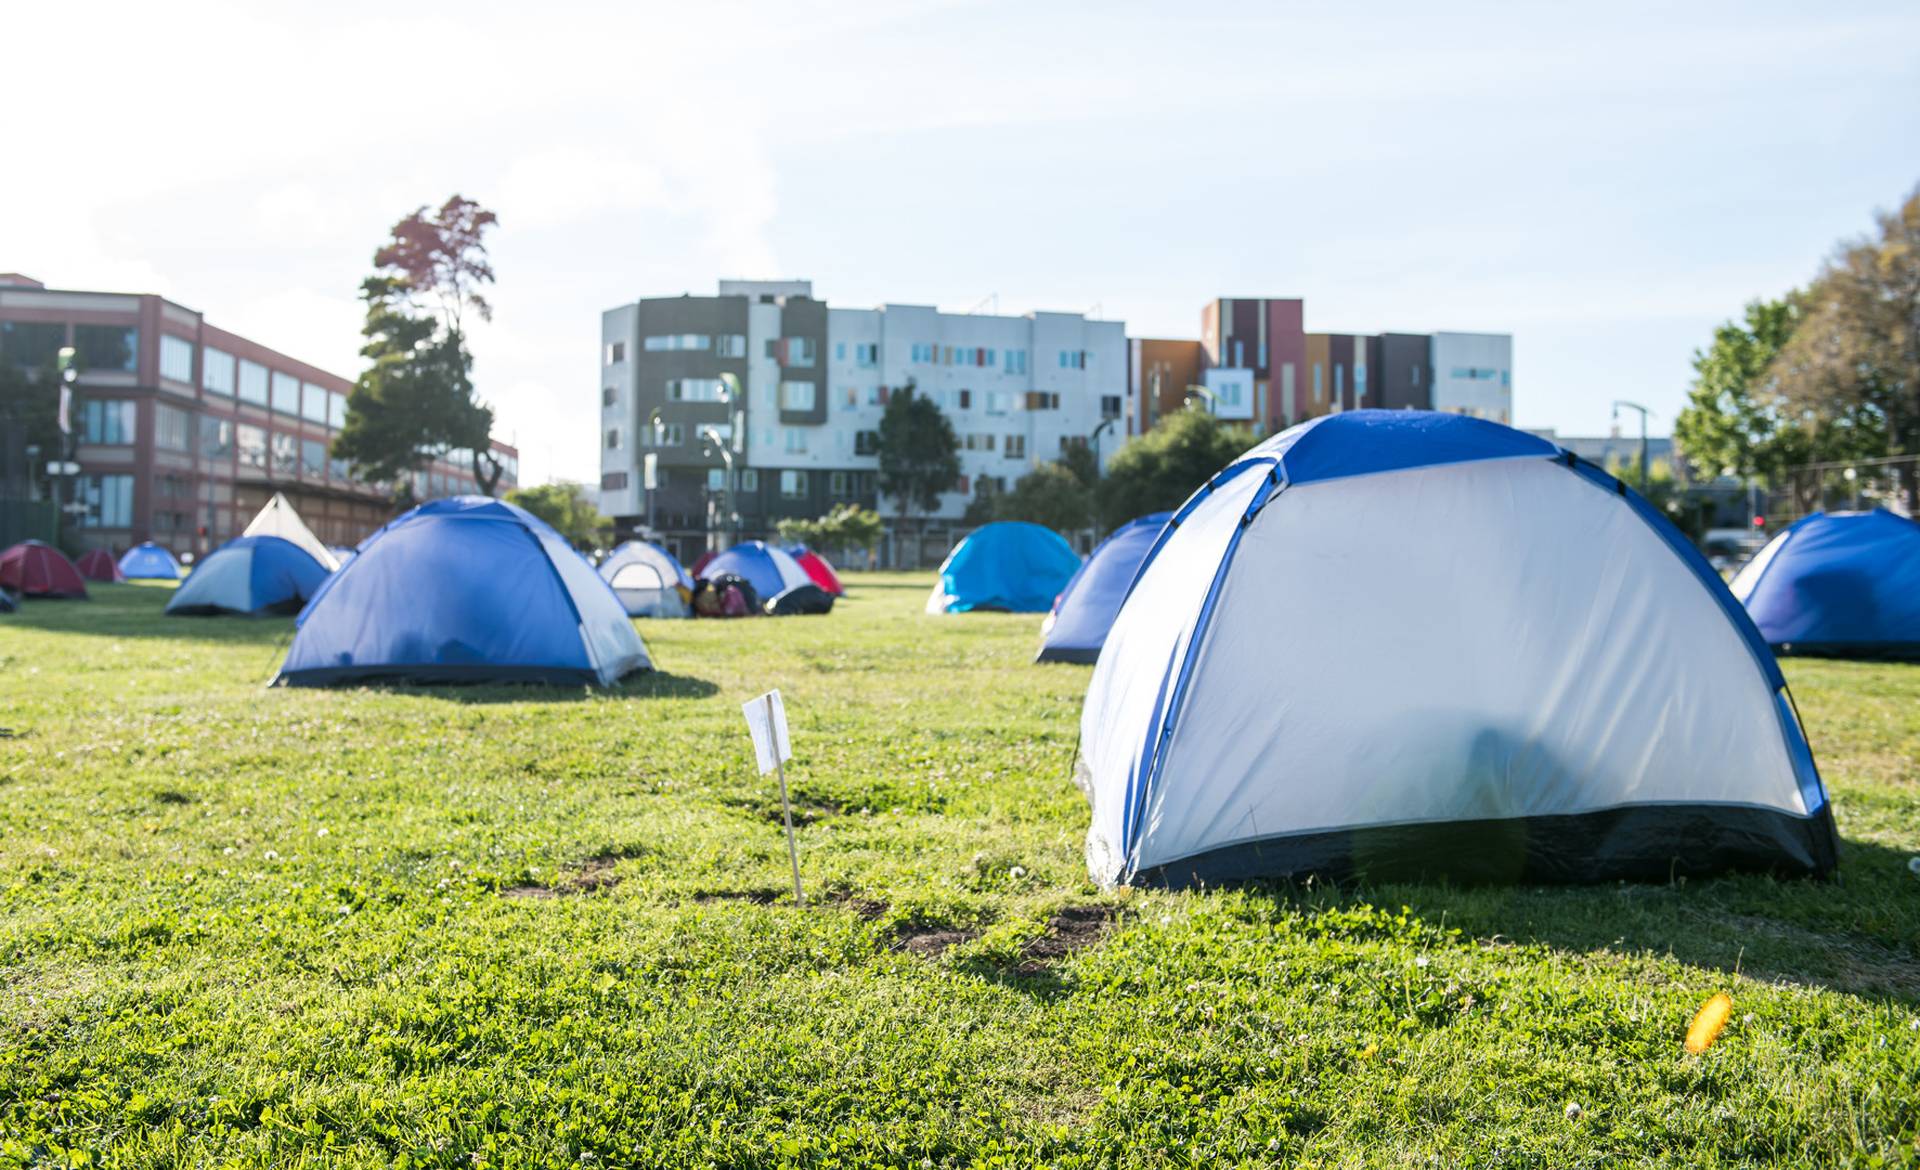 Tents are spaced for social distancing at Bay View Park K.C. Jones Playground on May 5, 2020. Beth LaBerge/KQED